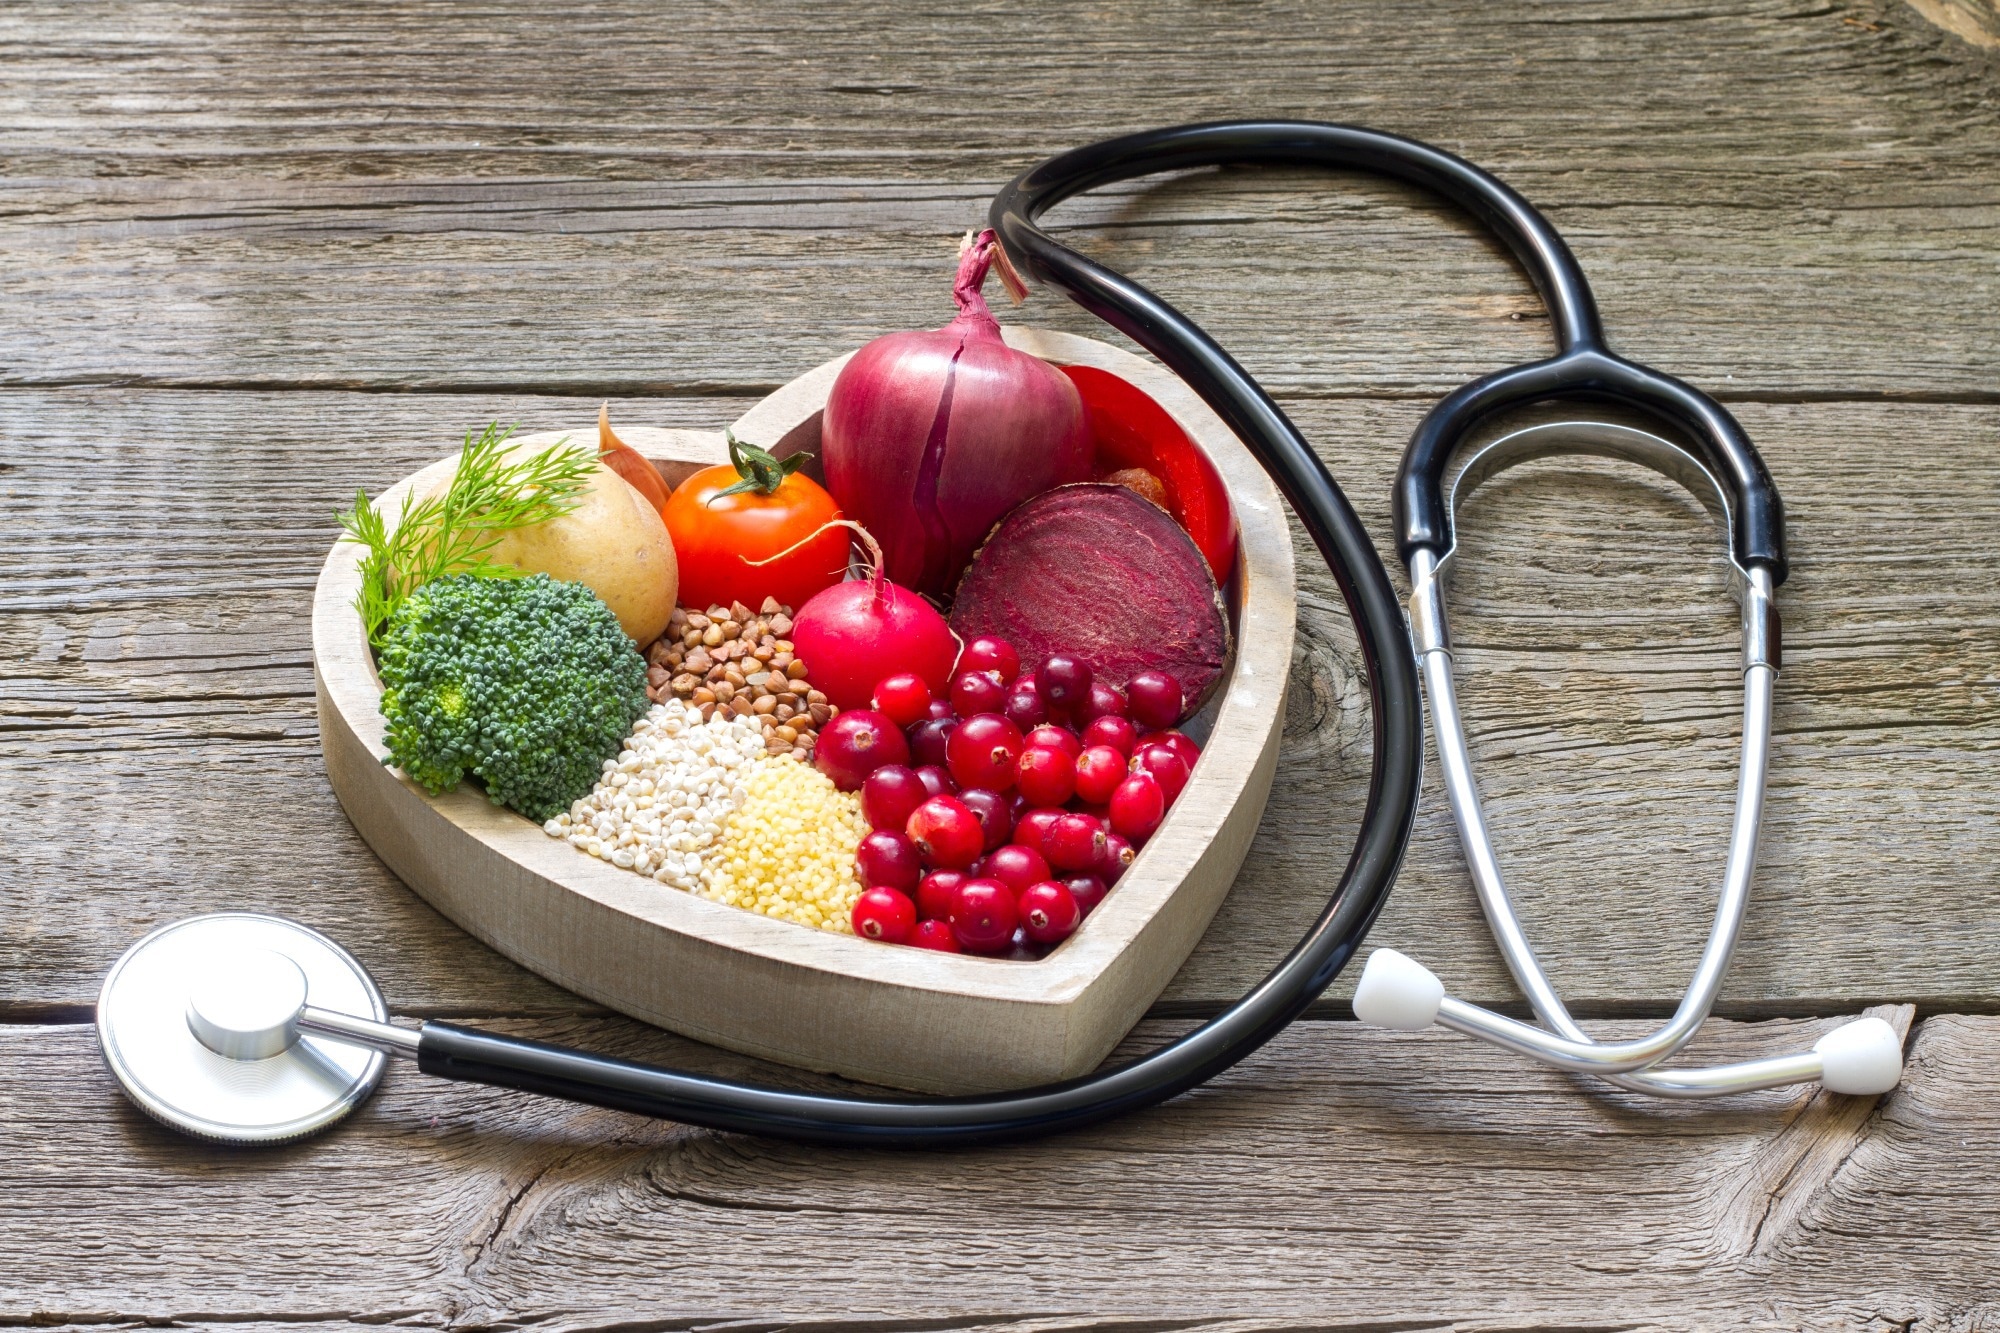 Study: What Is Considered Healthy Eating? An Exploratory Study among College Students of Nutrition and Food Science. Image Credit: udra11 / Shutterstock